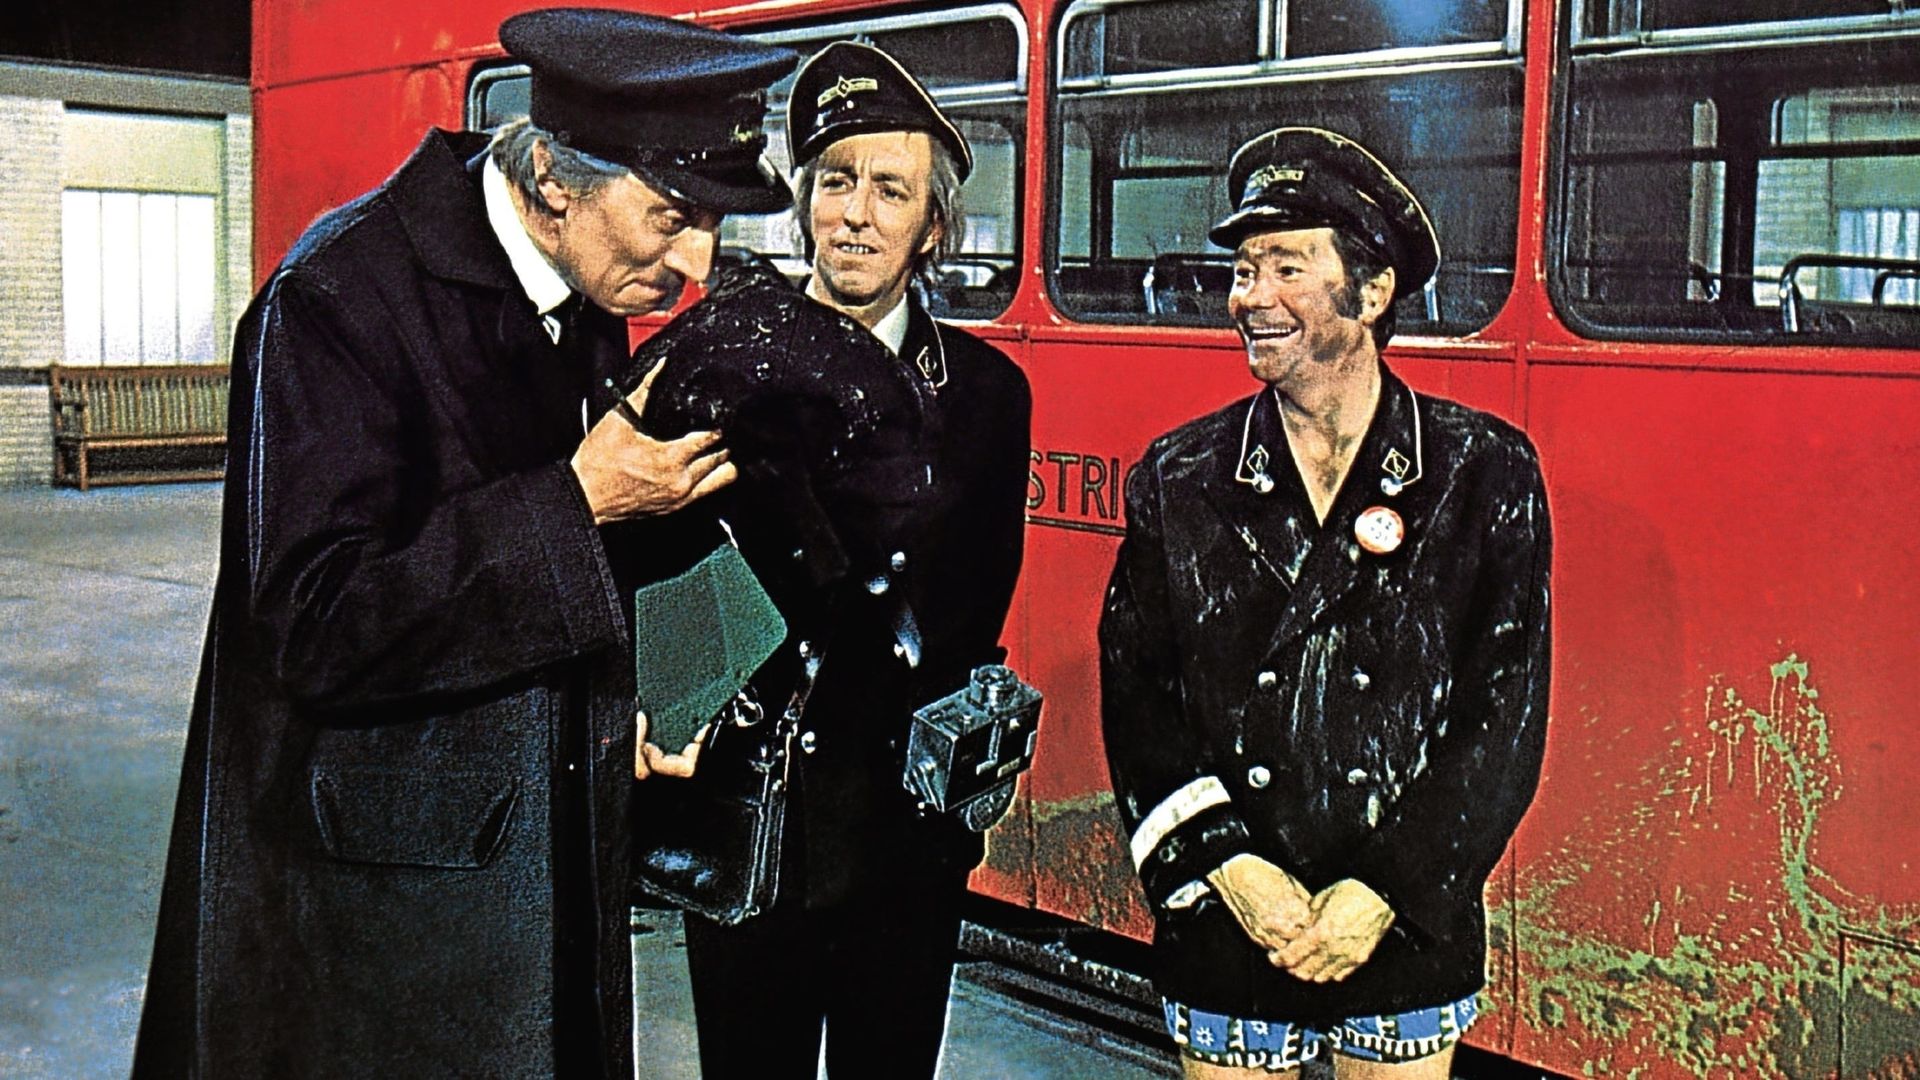 On the Buses Backdrop